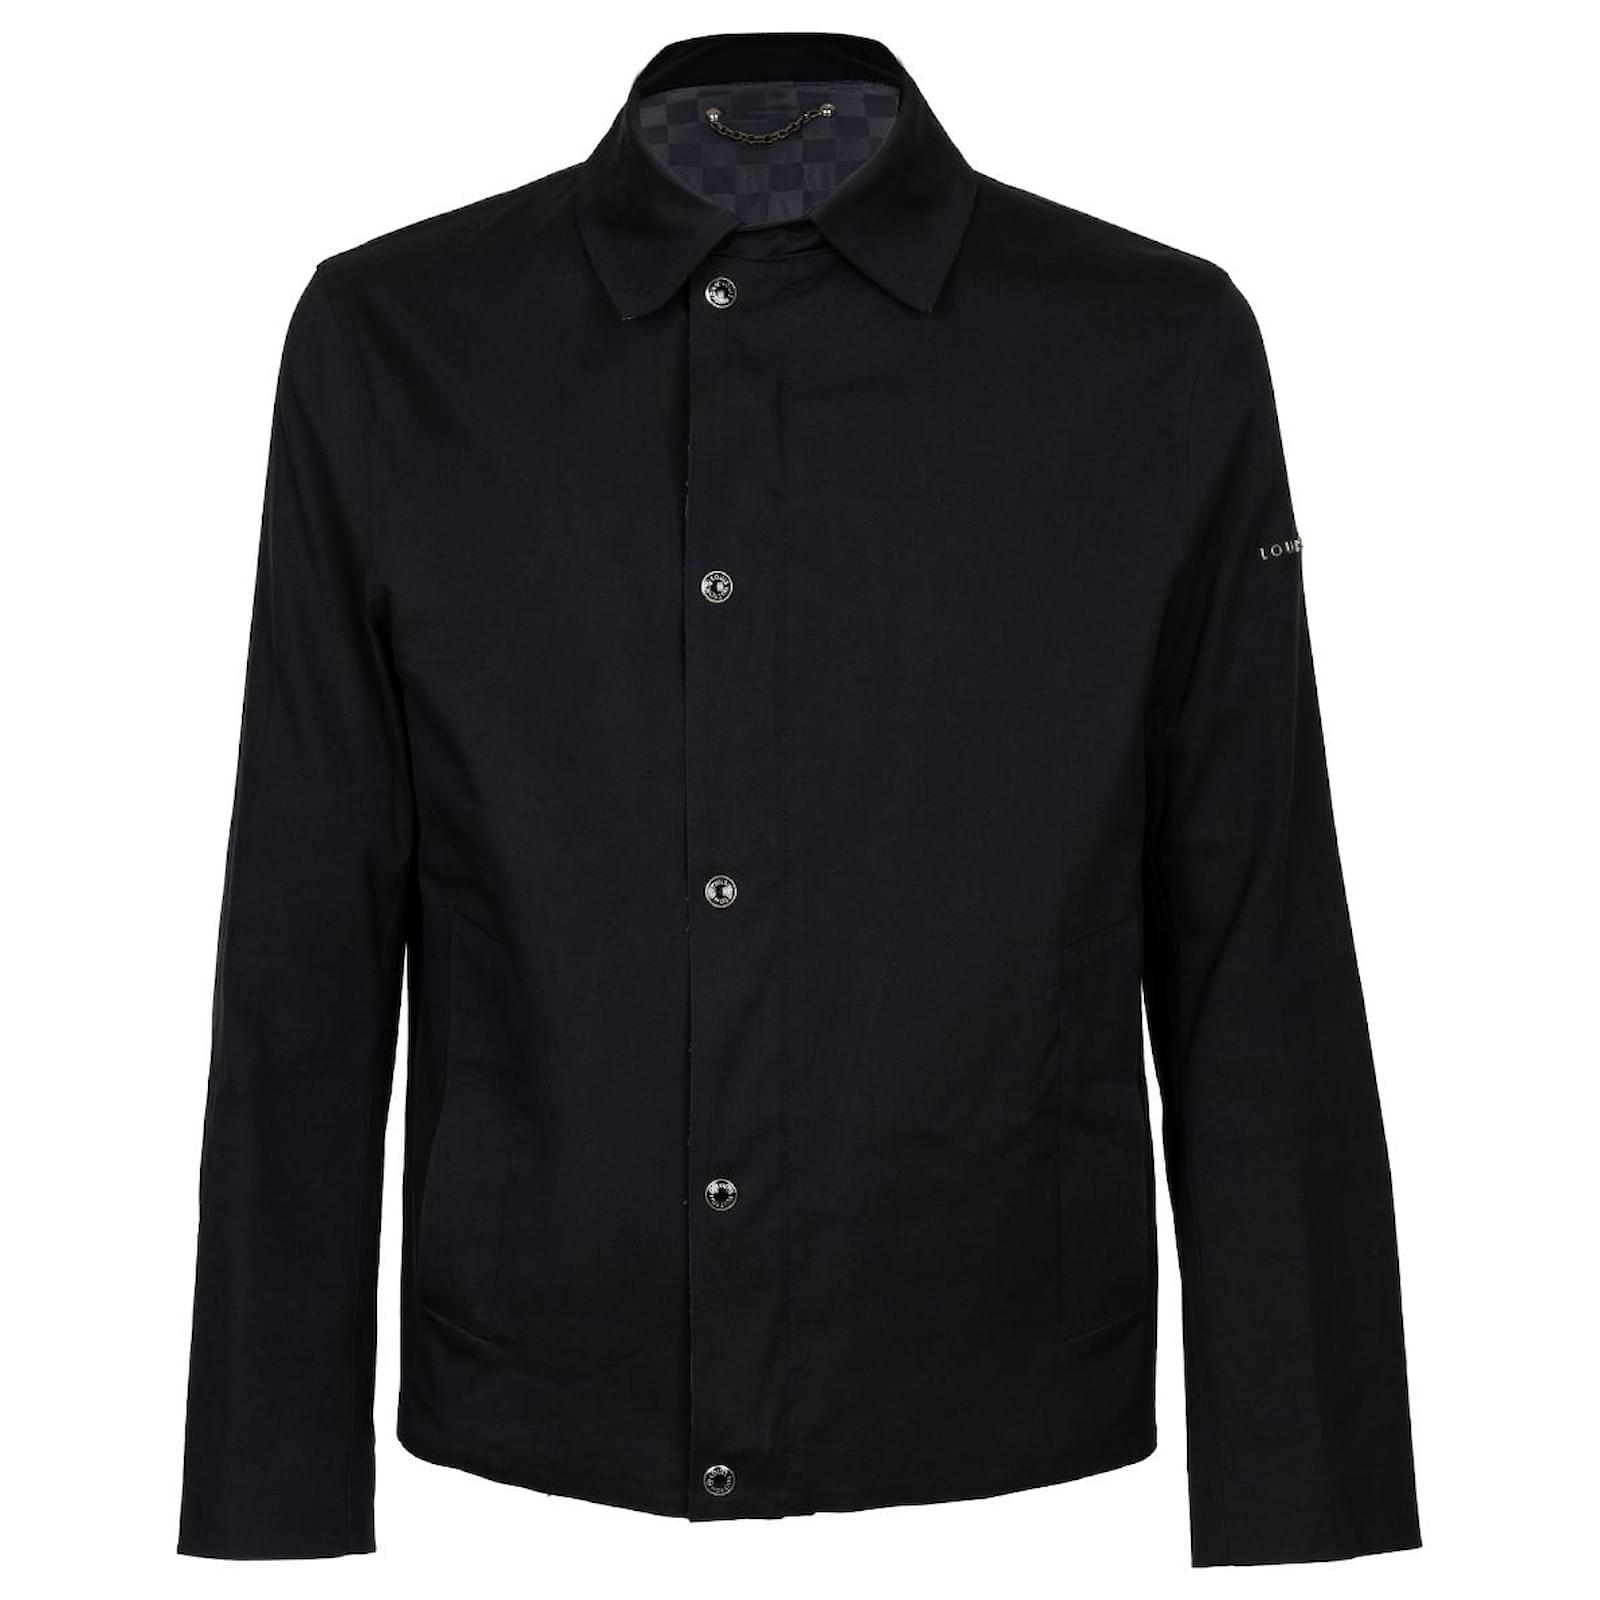 Black jacket from Louis Vuitton for men's fashion